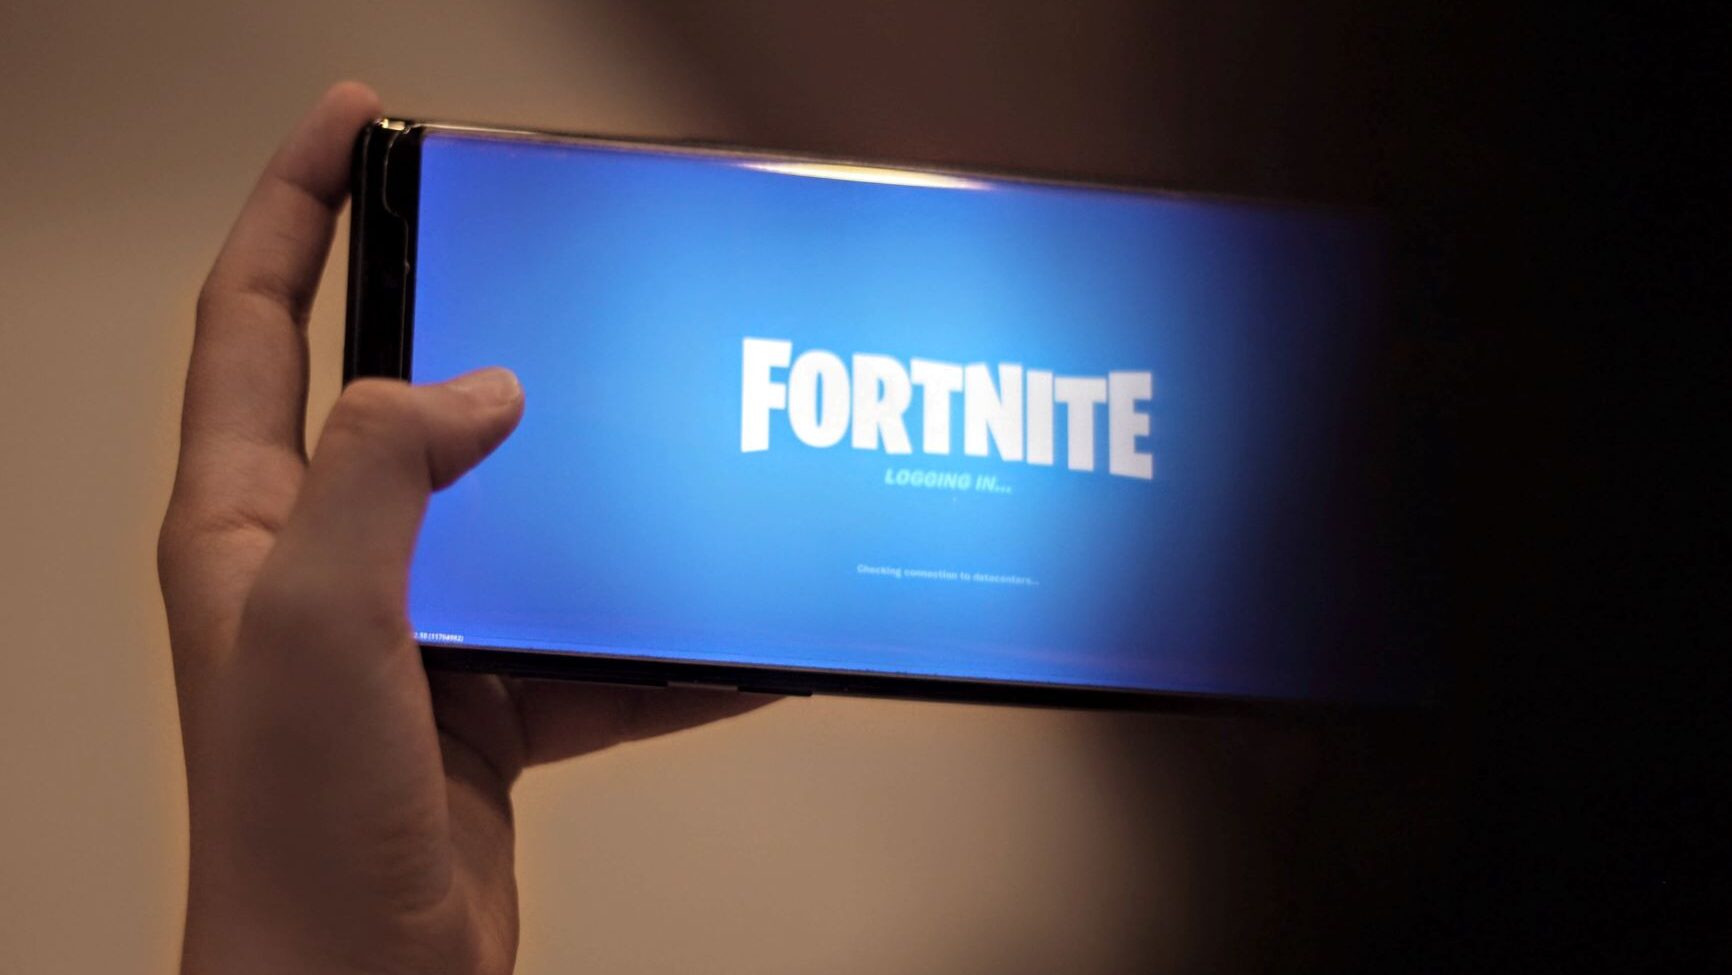 Person holding up mobile phone, playing Fortnite game